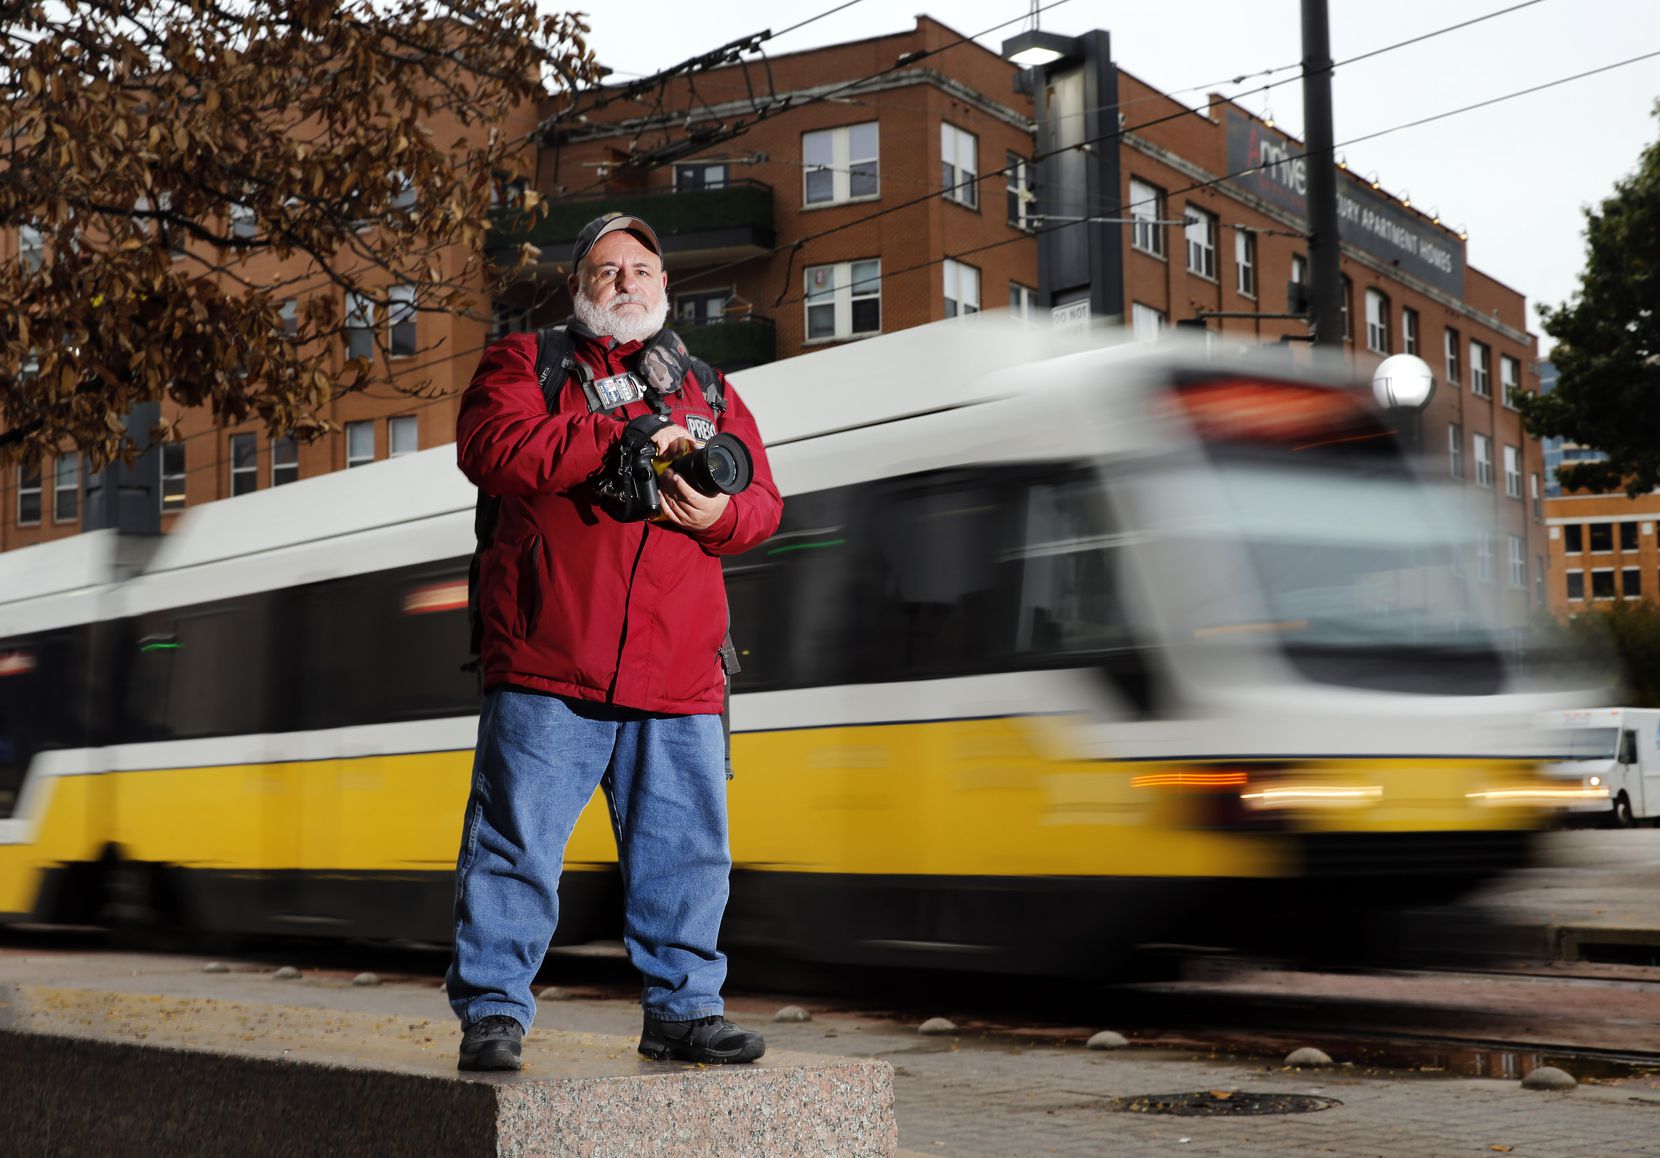 Dallas-Fort Worth's transit authority has agreed to pay Avi Adelman $345,000 to settle his...